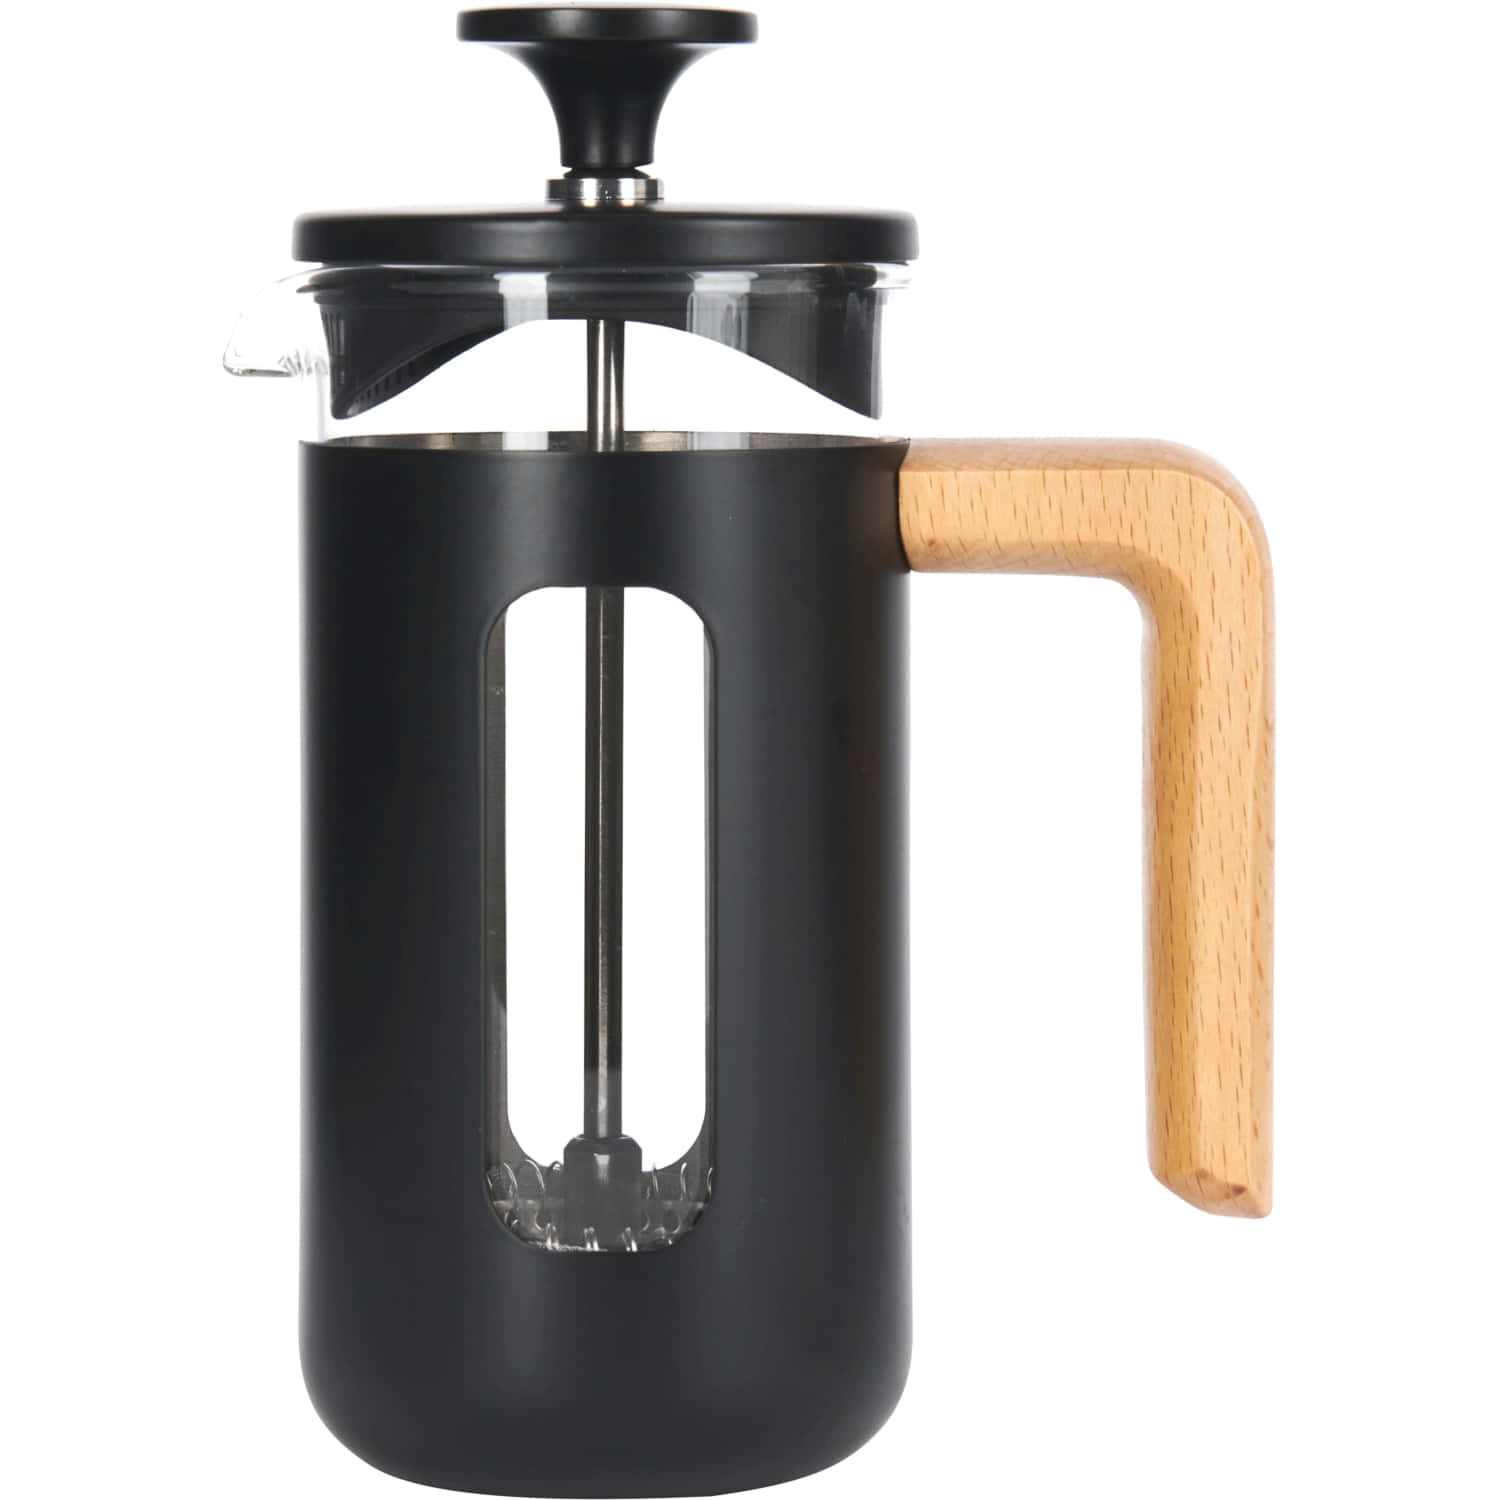 Cafetiera French Press - Pisa - Black Wood Handle 3 cups | Creative Tops